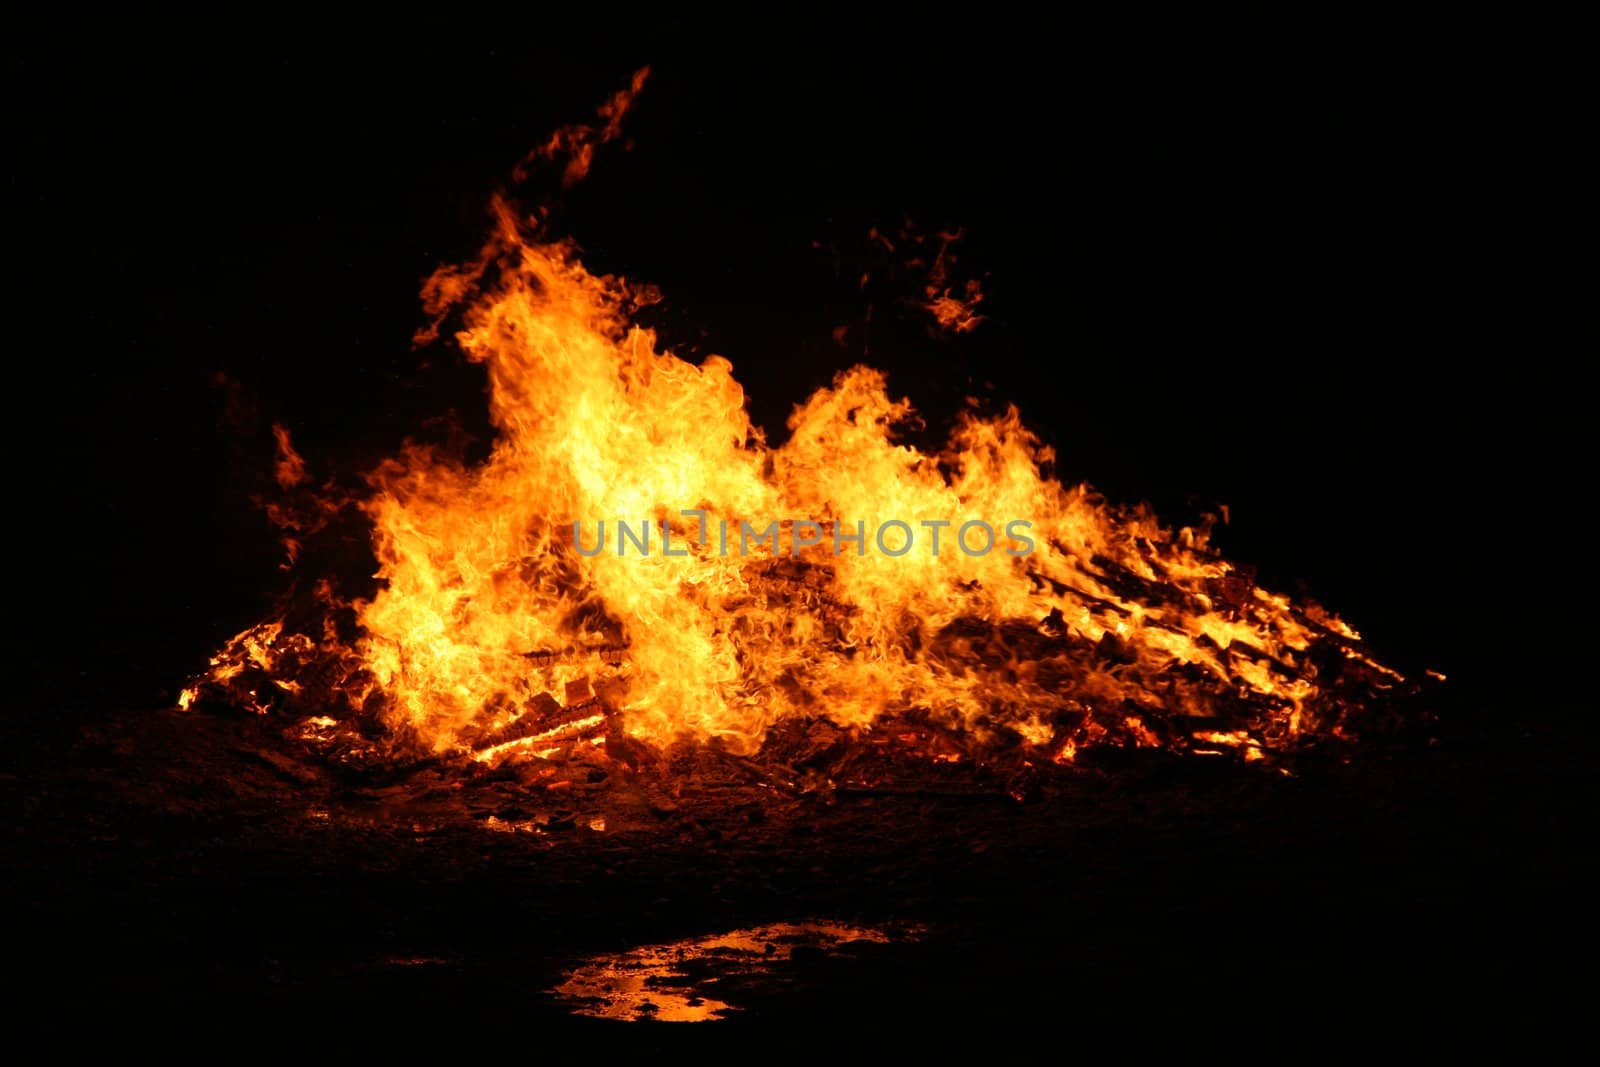 background of a bonfire, hot warm reflection, fire isolation